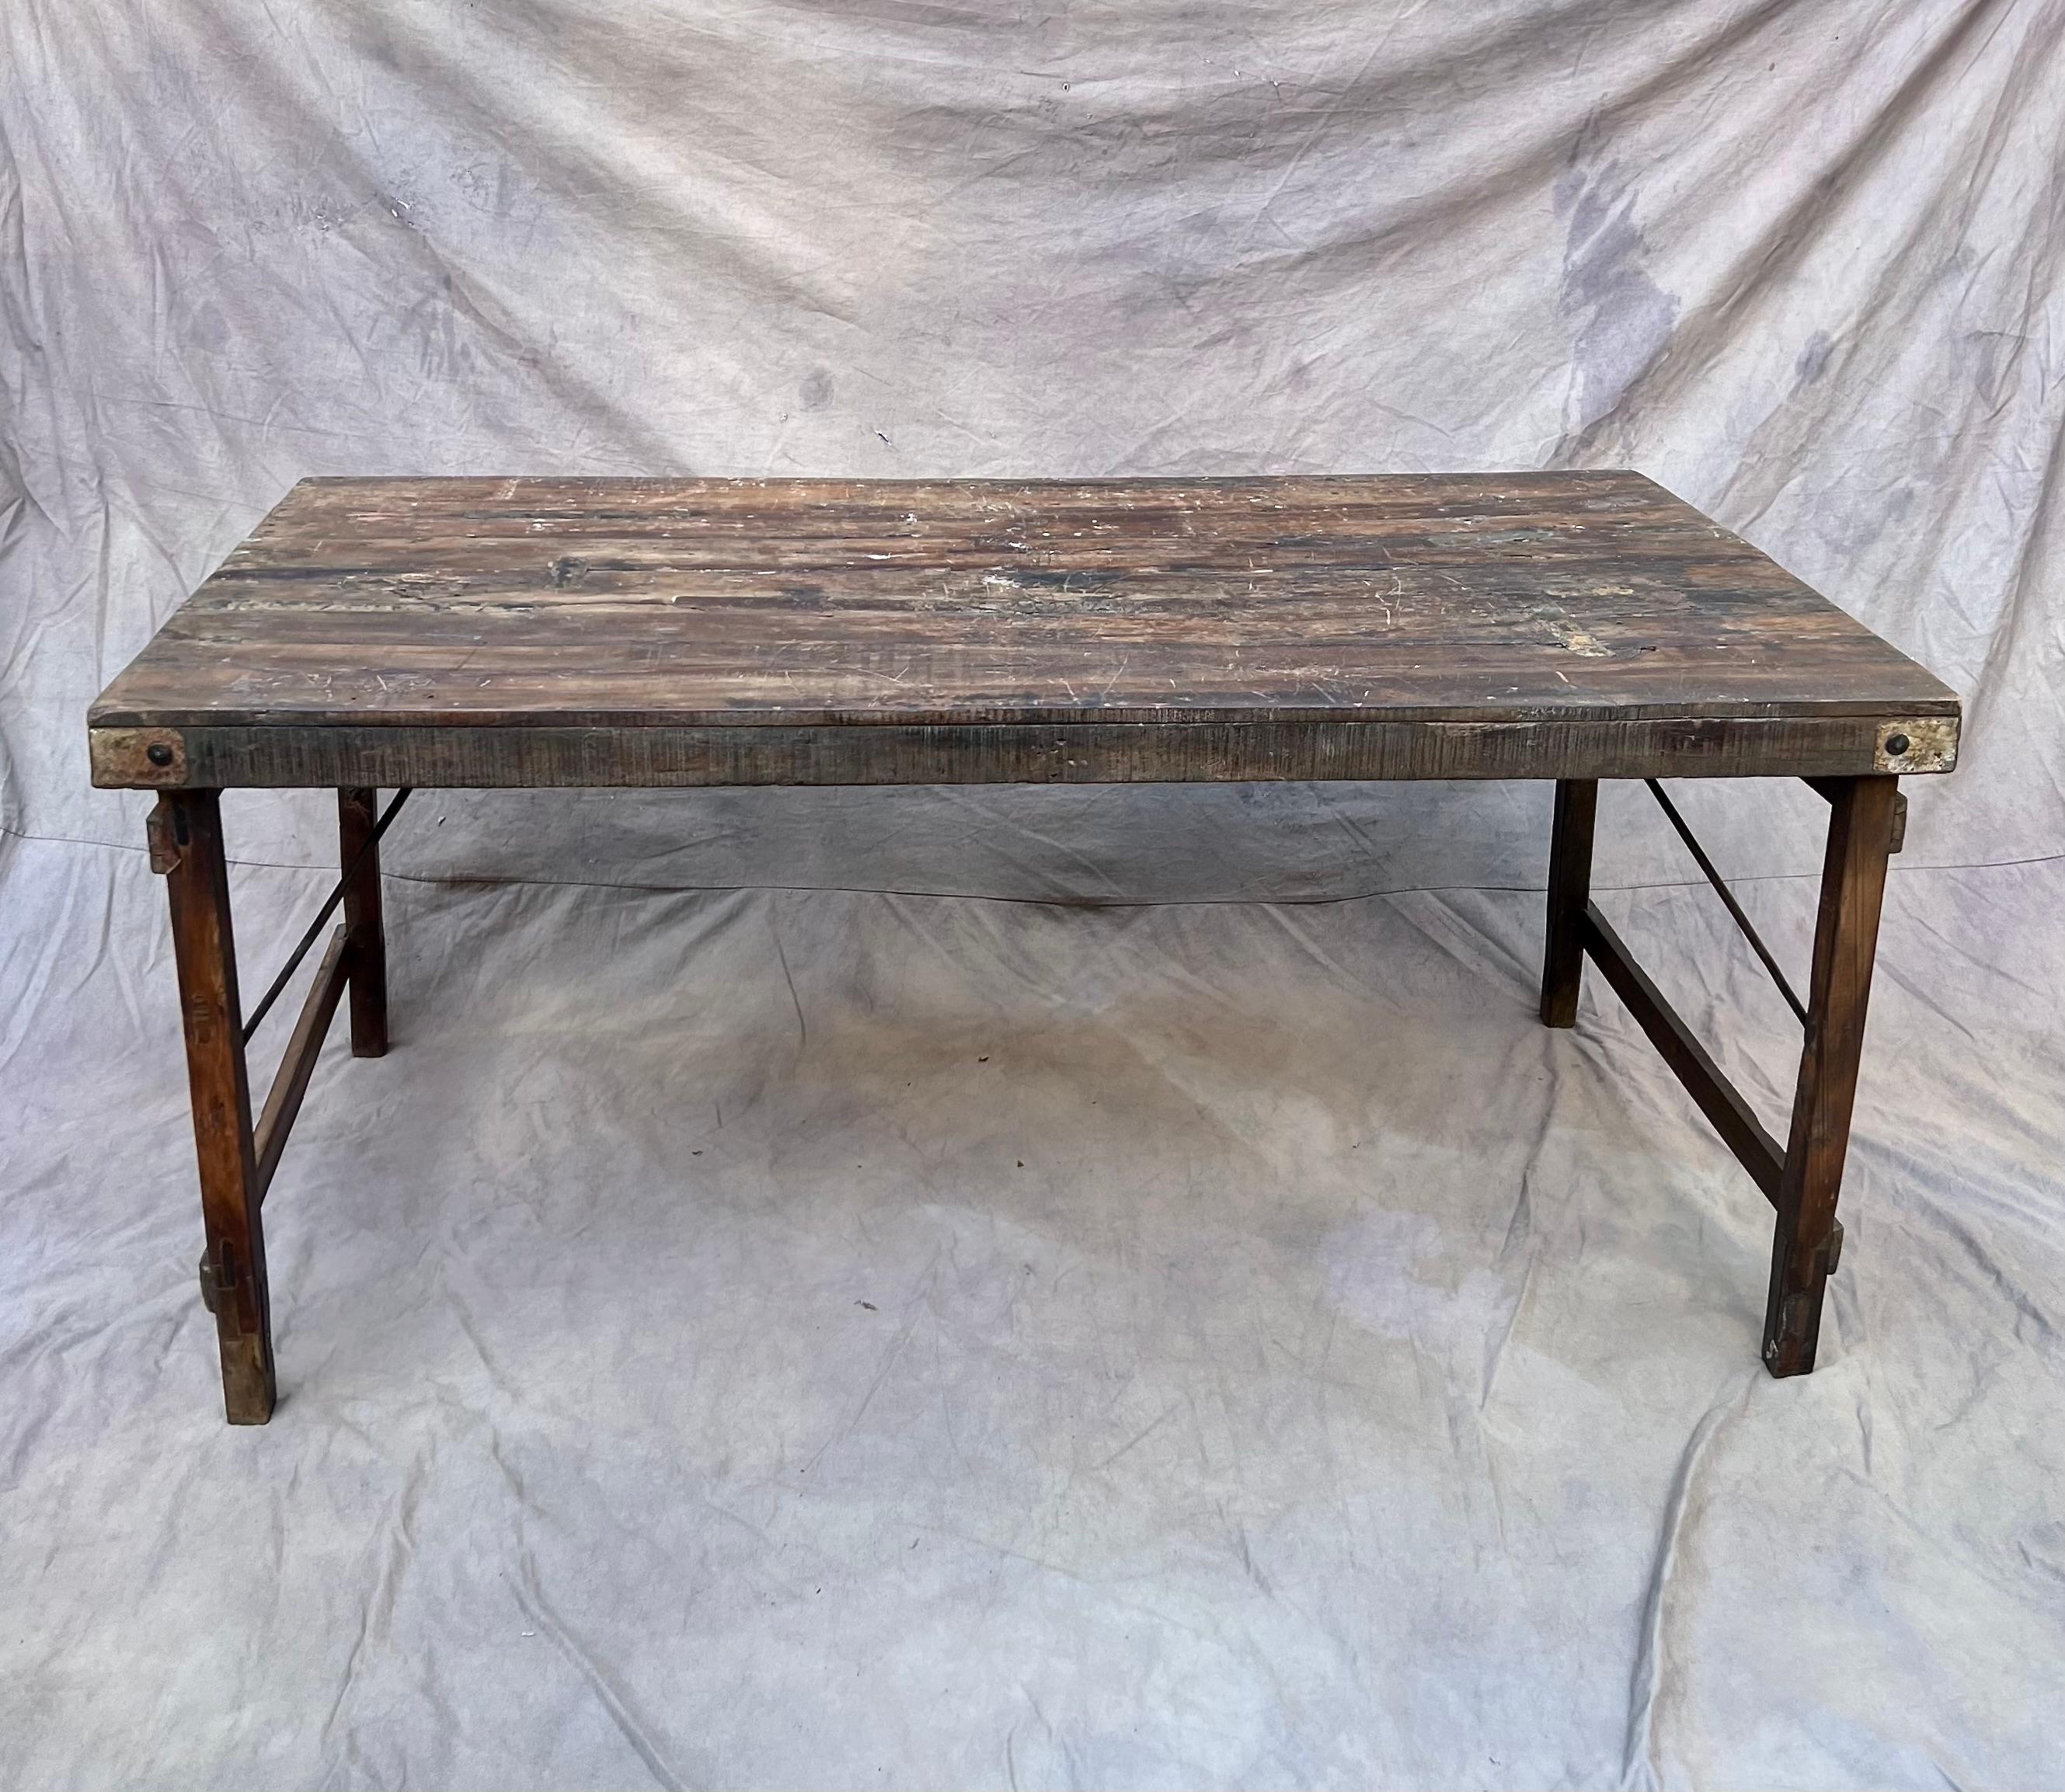 Vintage Belgian folding farm table can be used as a table or desk. Looks great in the garden for a dinner party and brings some wabi-sabi sophistication to the indoors. 

This table folds up easily to be less than 4